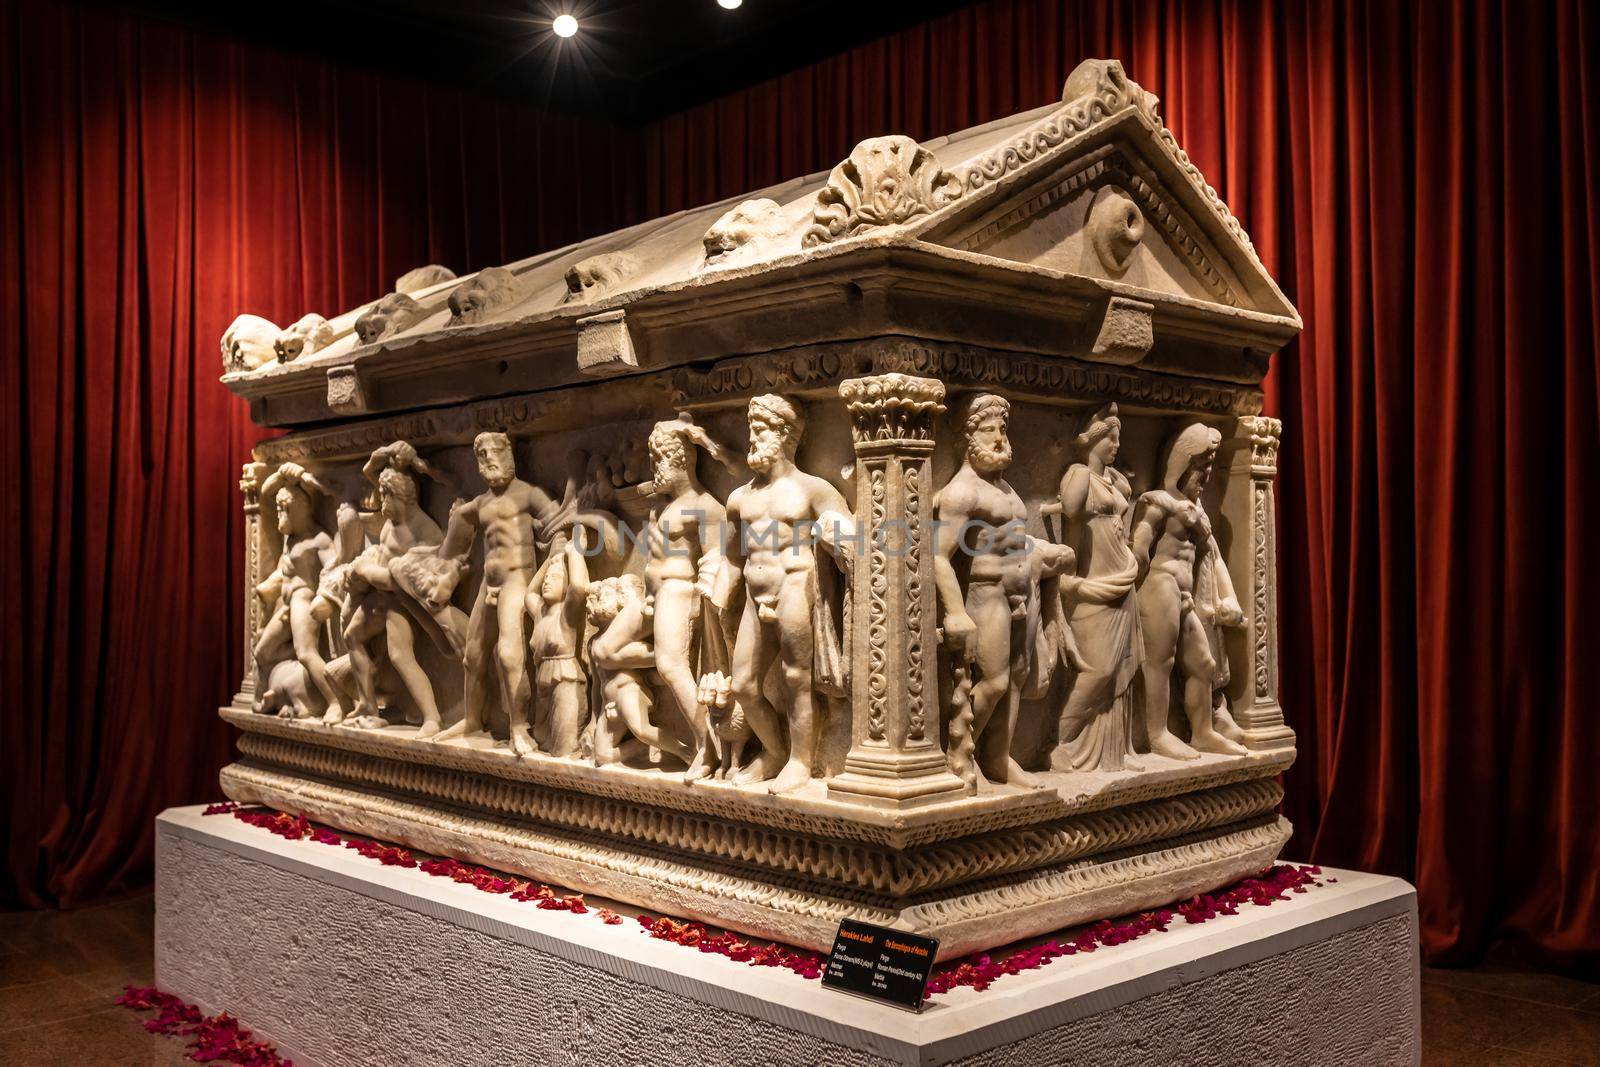 ANTALYA, TURKEY - JANUARY 18, 2020: The Heracles Sarcophagus. Antalya Archeological Museum is one of Turkey's largest museums located in Antalya city in Turkey